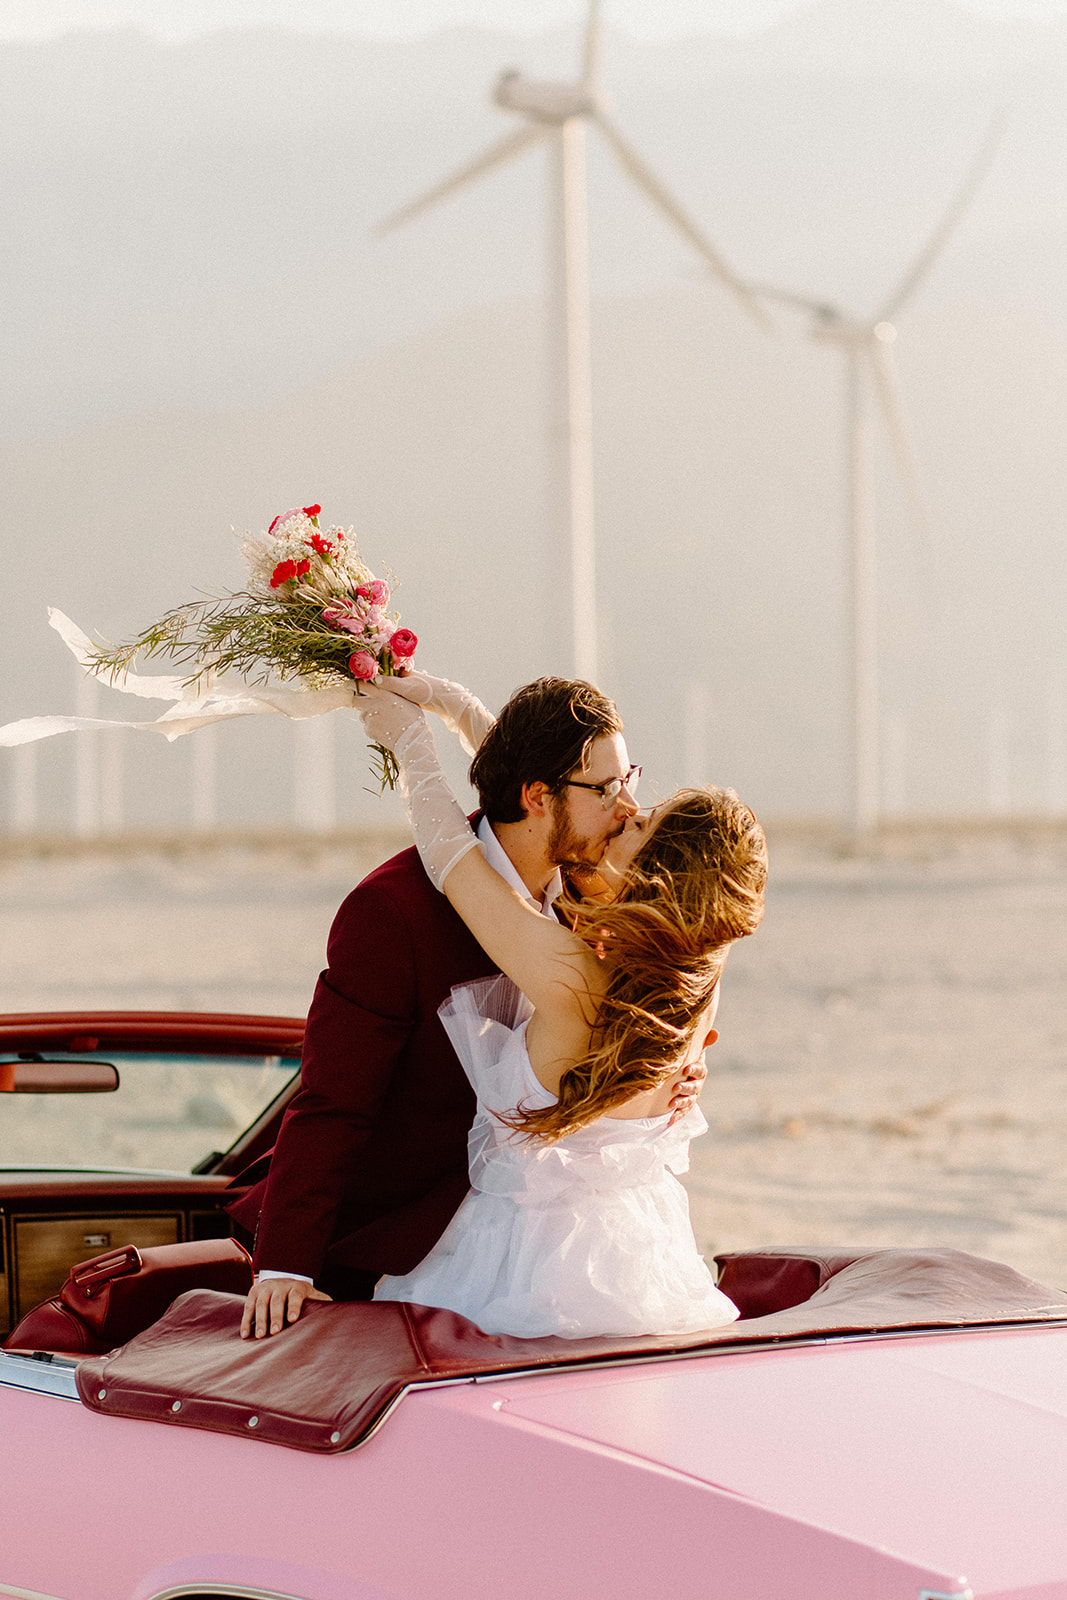 Fun and intimate California Elopement locations